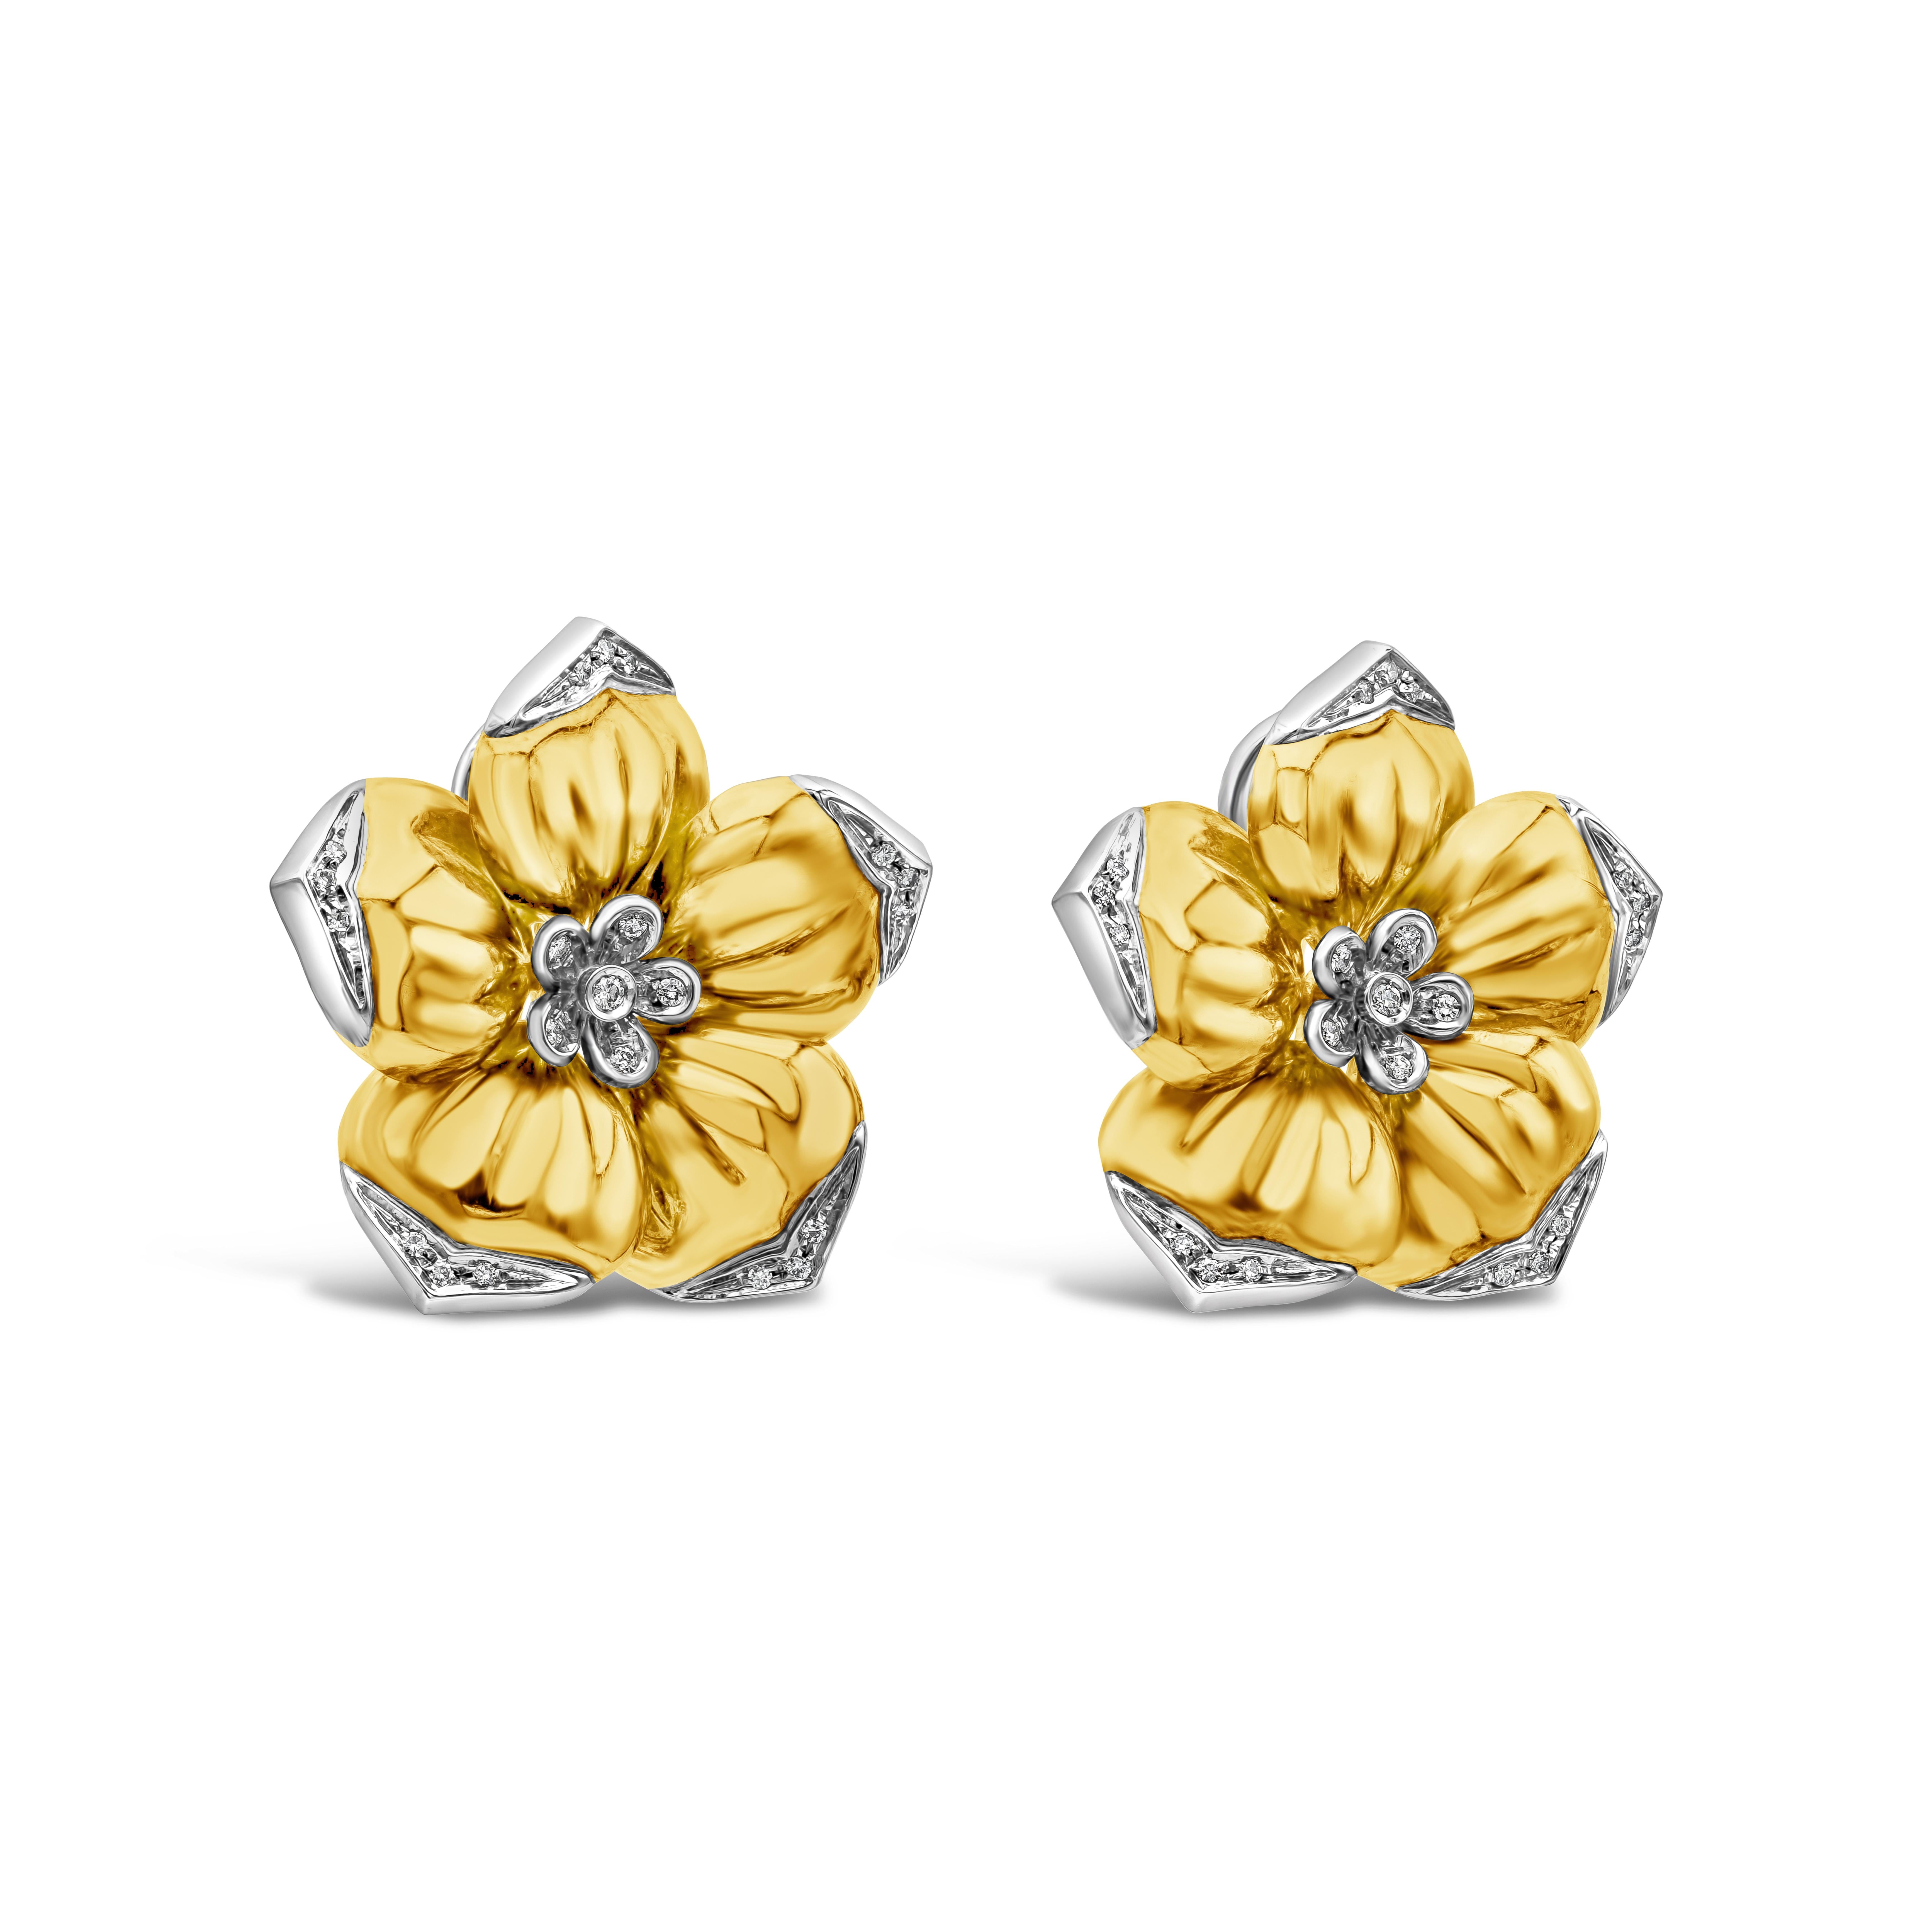 Flower 18K yellow gold earrings accented by round brilliant diamonds weighing 0.25 carats total. The diameter of the earring is 1.5 inches. The earrings signed 